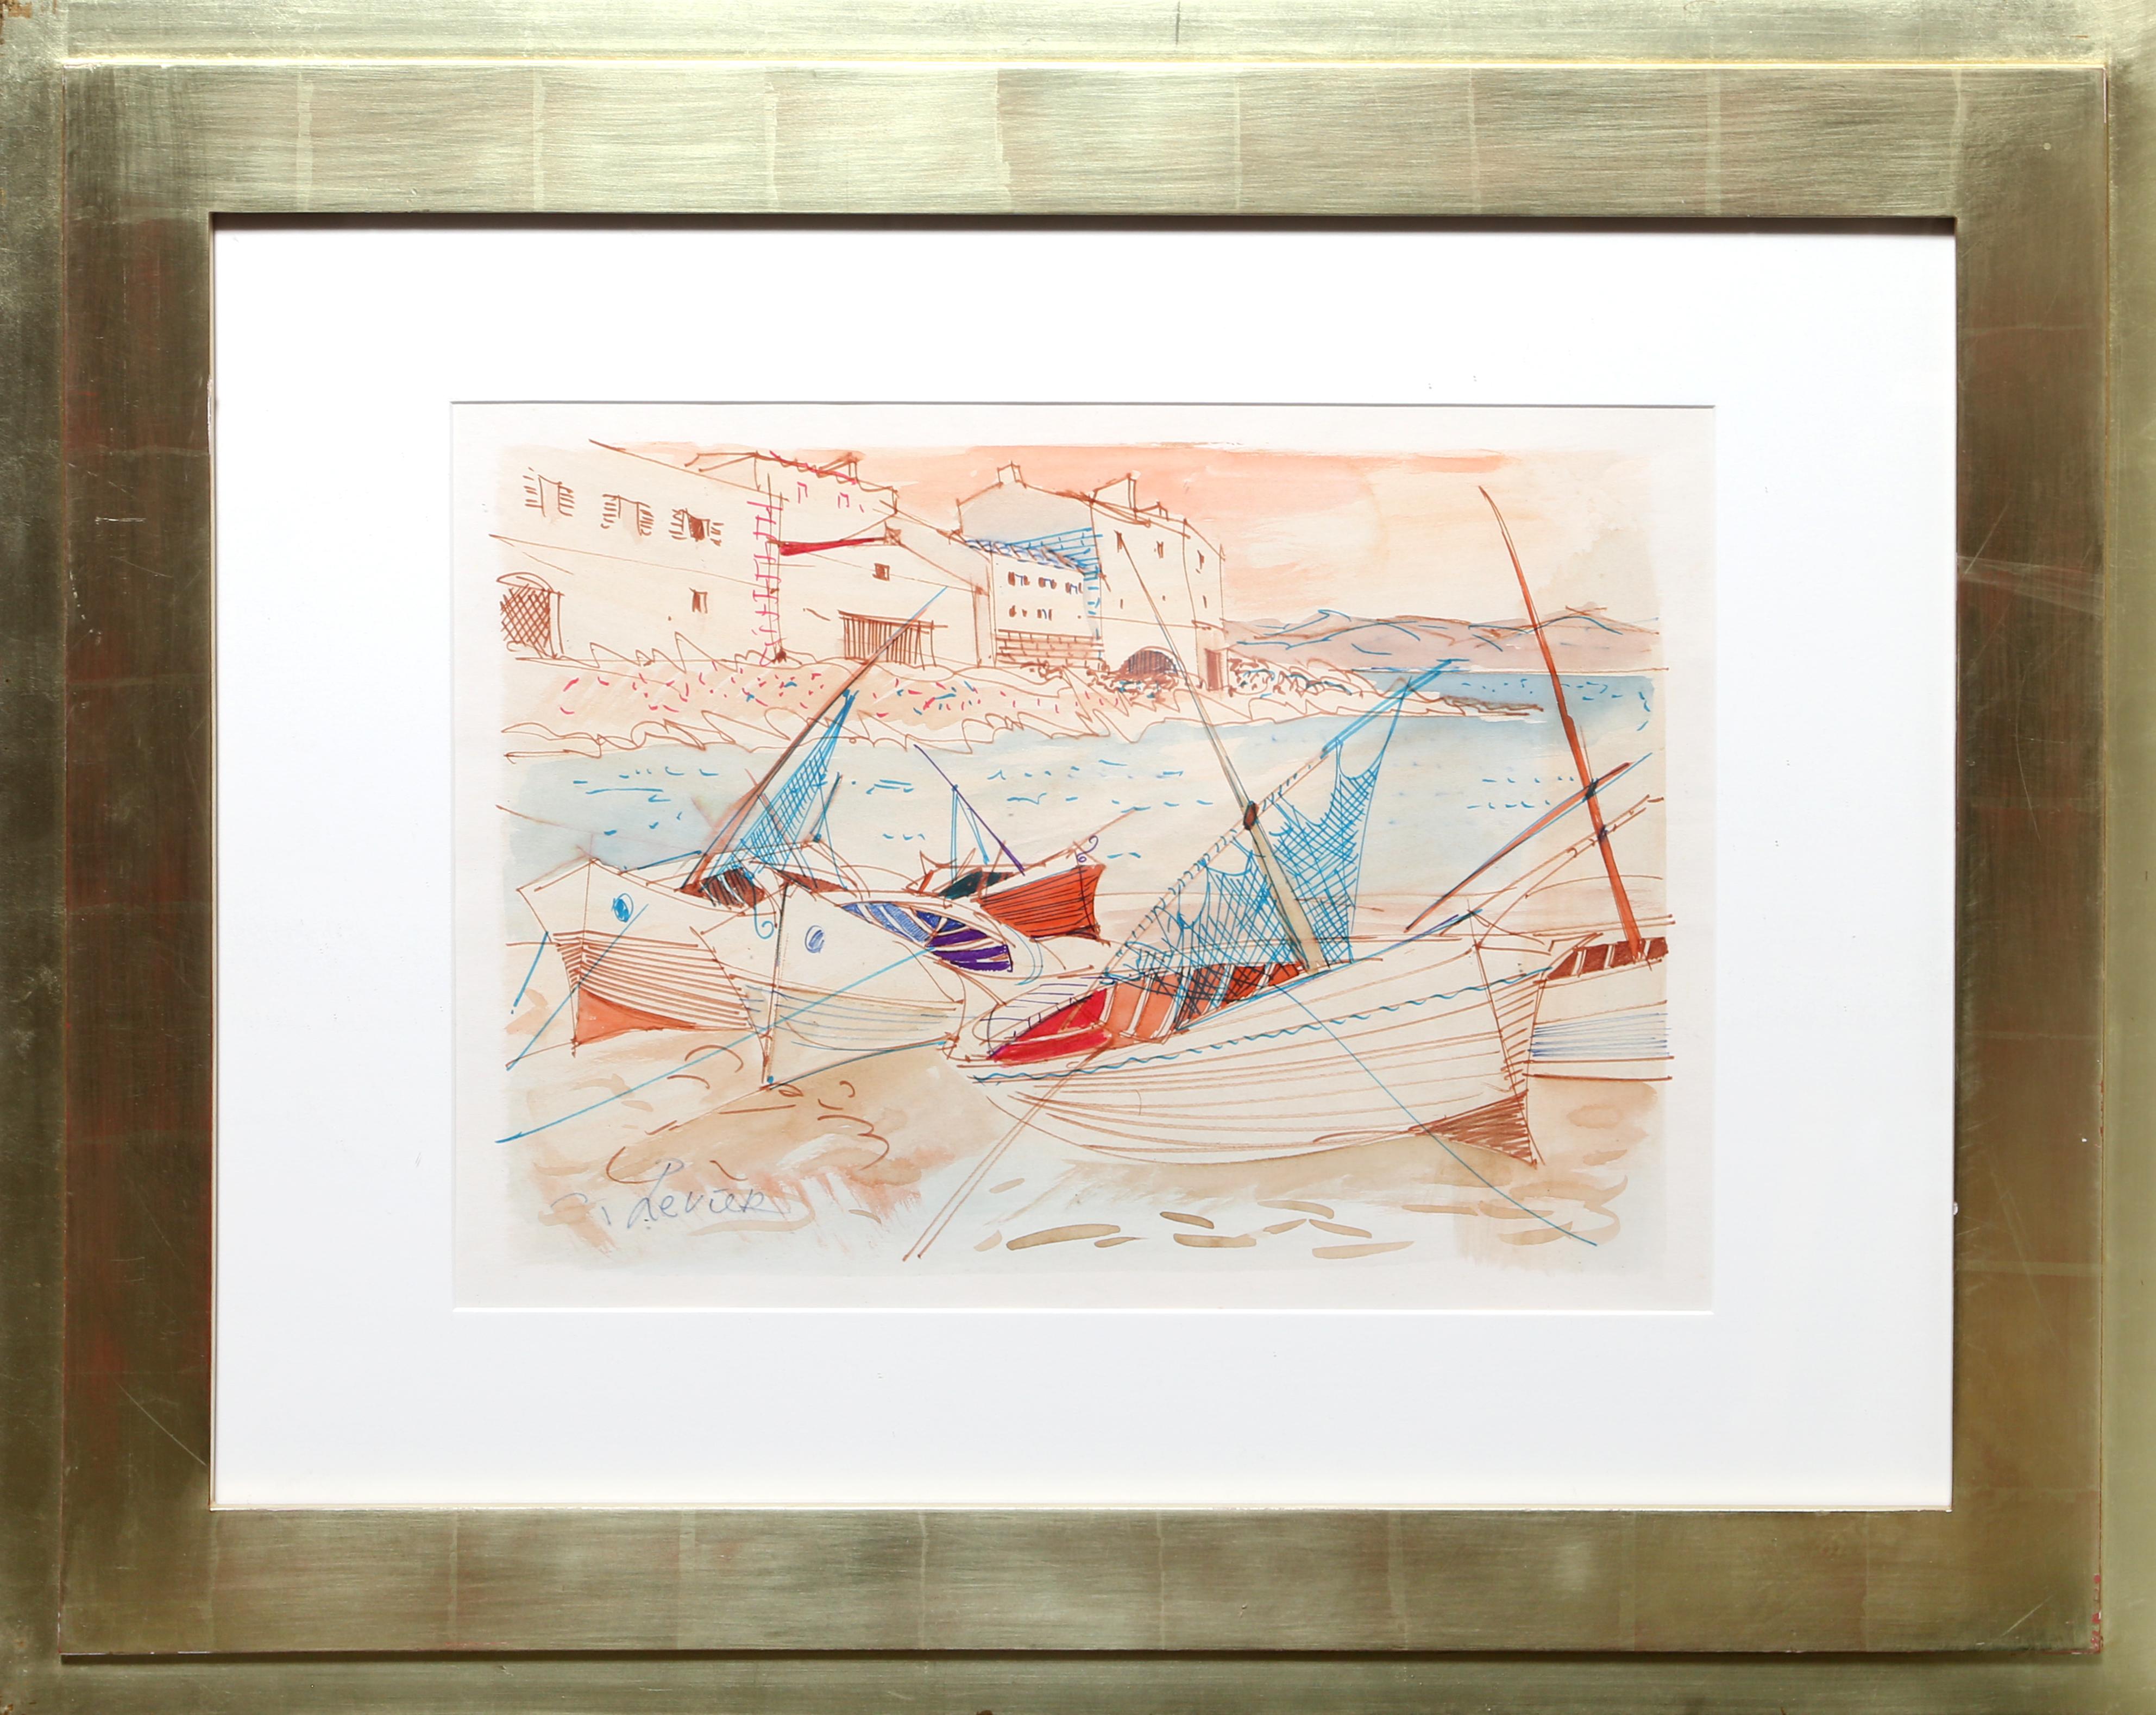 Sailboats at Shore by Charles Levier, French (1920–2003)
Date: circa 1965
Watercolor on Paper, signed l.r.
Image Size: 11 x 16 inches
Size: 19.5 x 25 in. (49.53 x 63.5 cm)
Frame: 24 x 30 inches